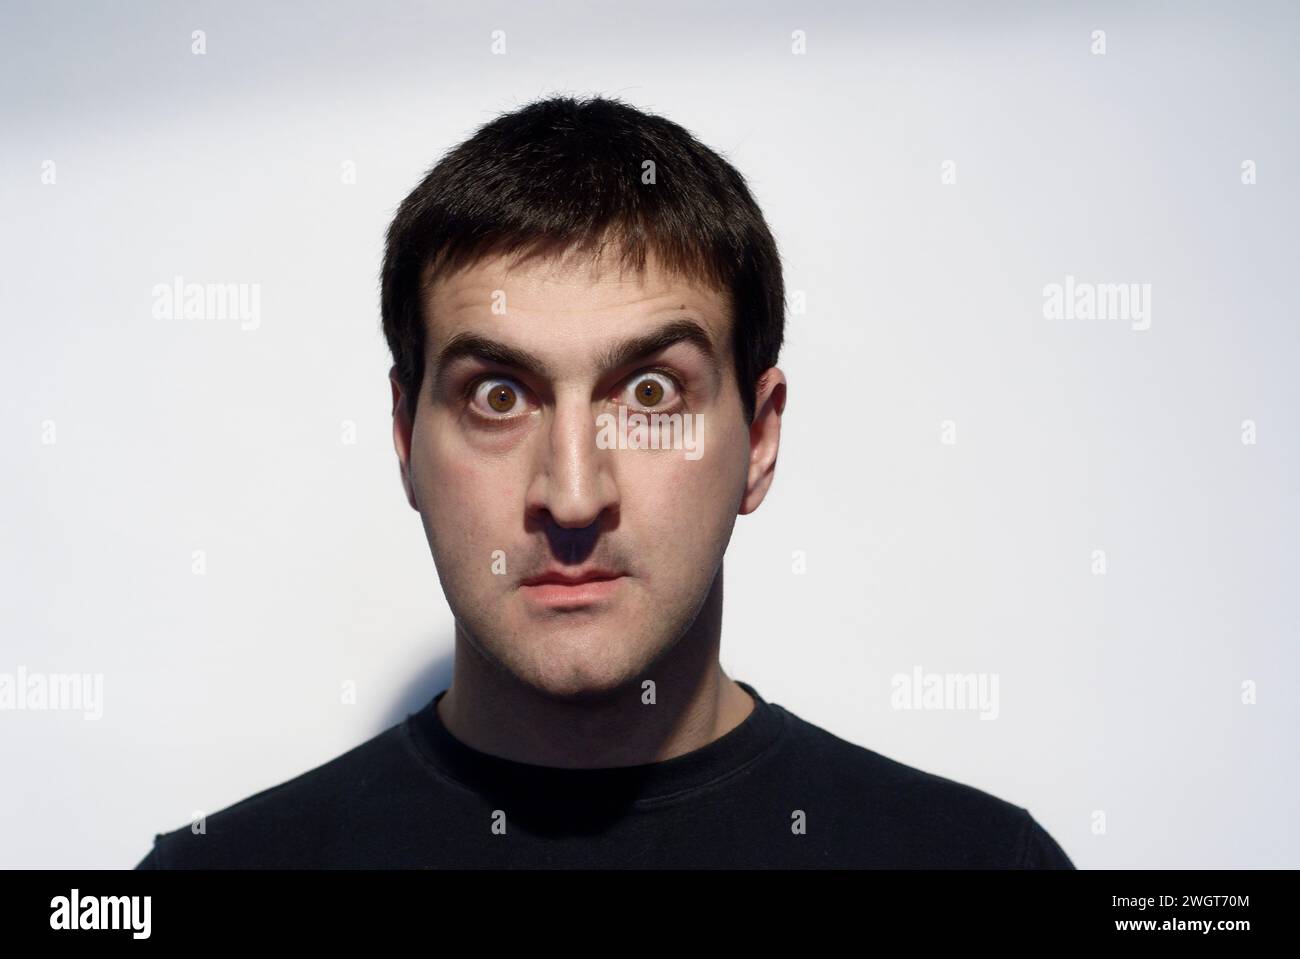 Adult man grimacing with his face and gesturing with his hands Stock Photo